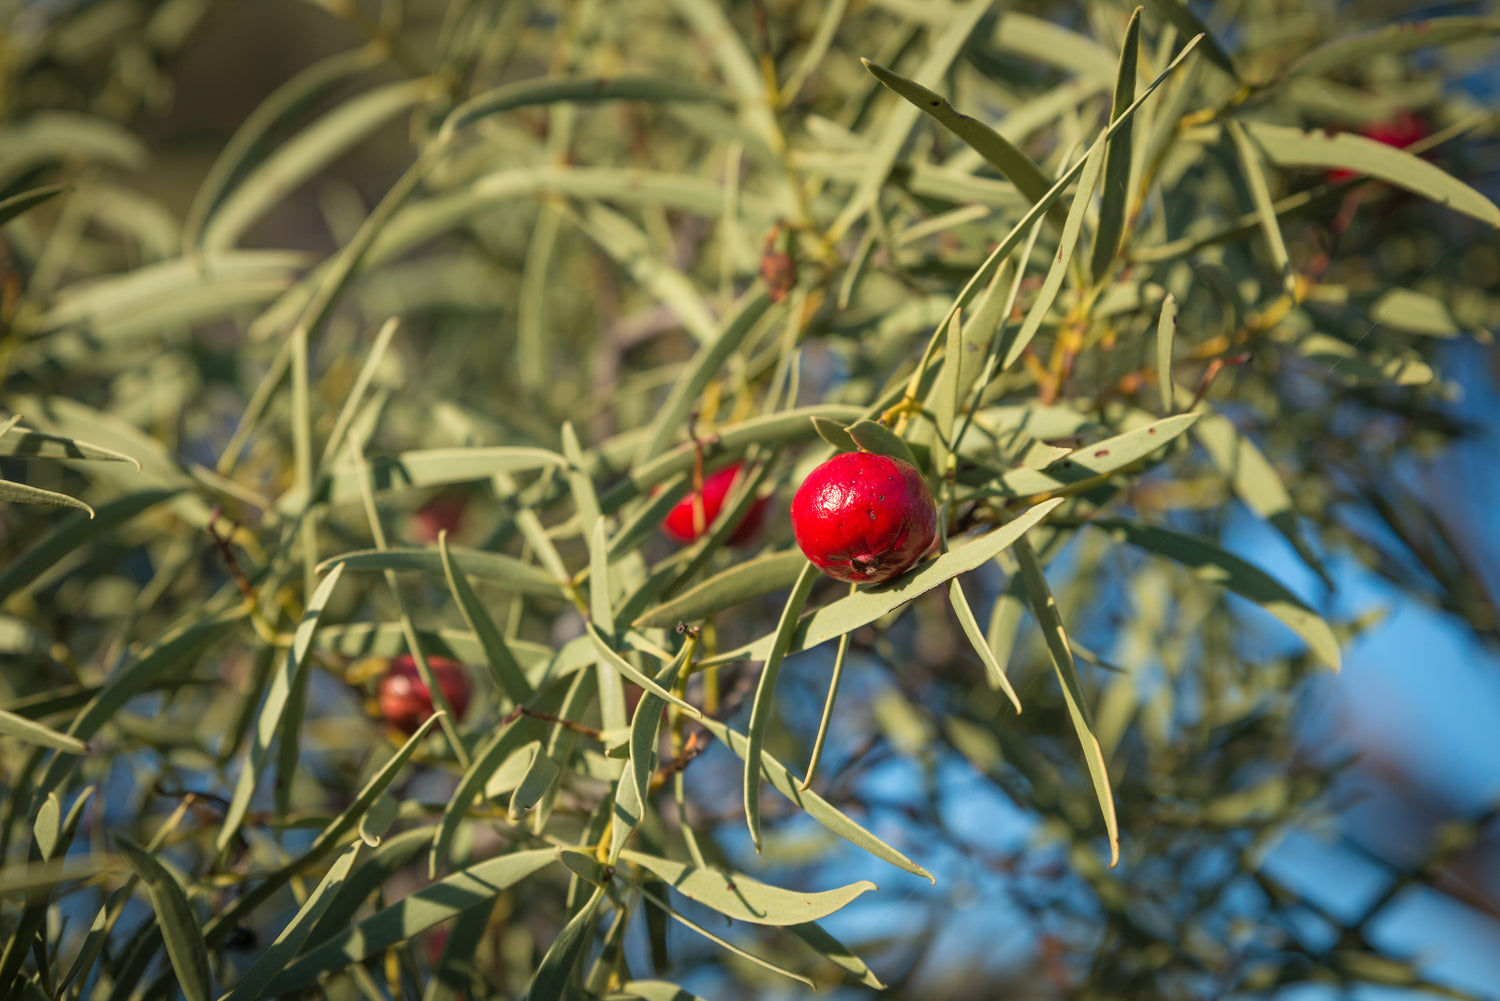 100% vegan, cruelty-free, Plant-based, active skincare for Australian women. We use quandong in some of our skincare products including our toning mist.